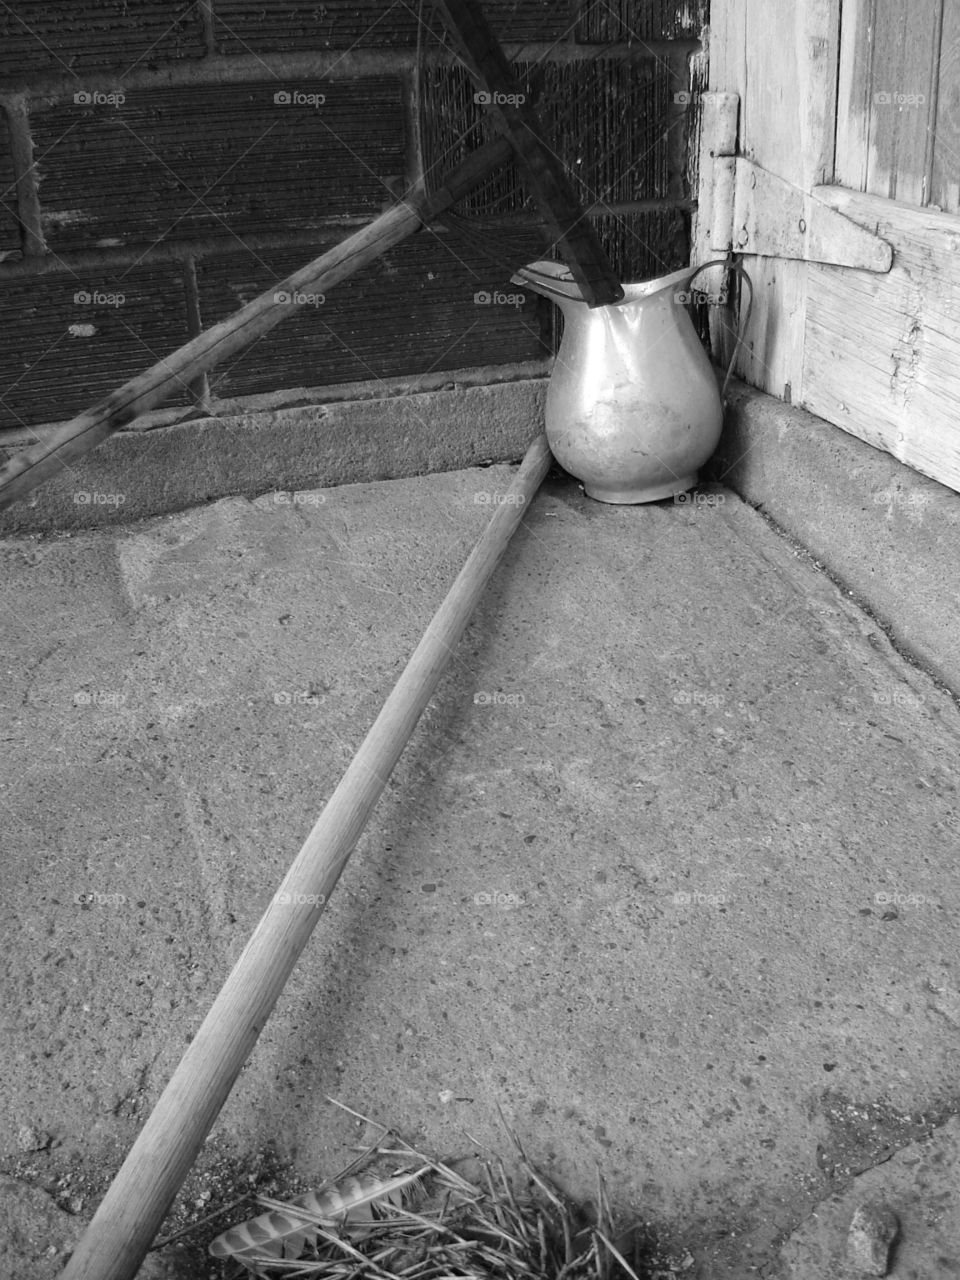 Pitcher. aluminum pitcher, take and feather by brick wall and barn door